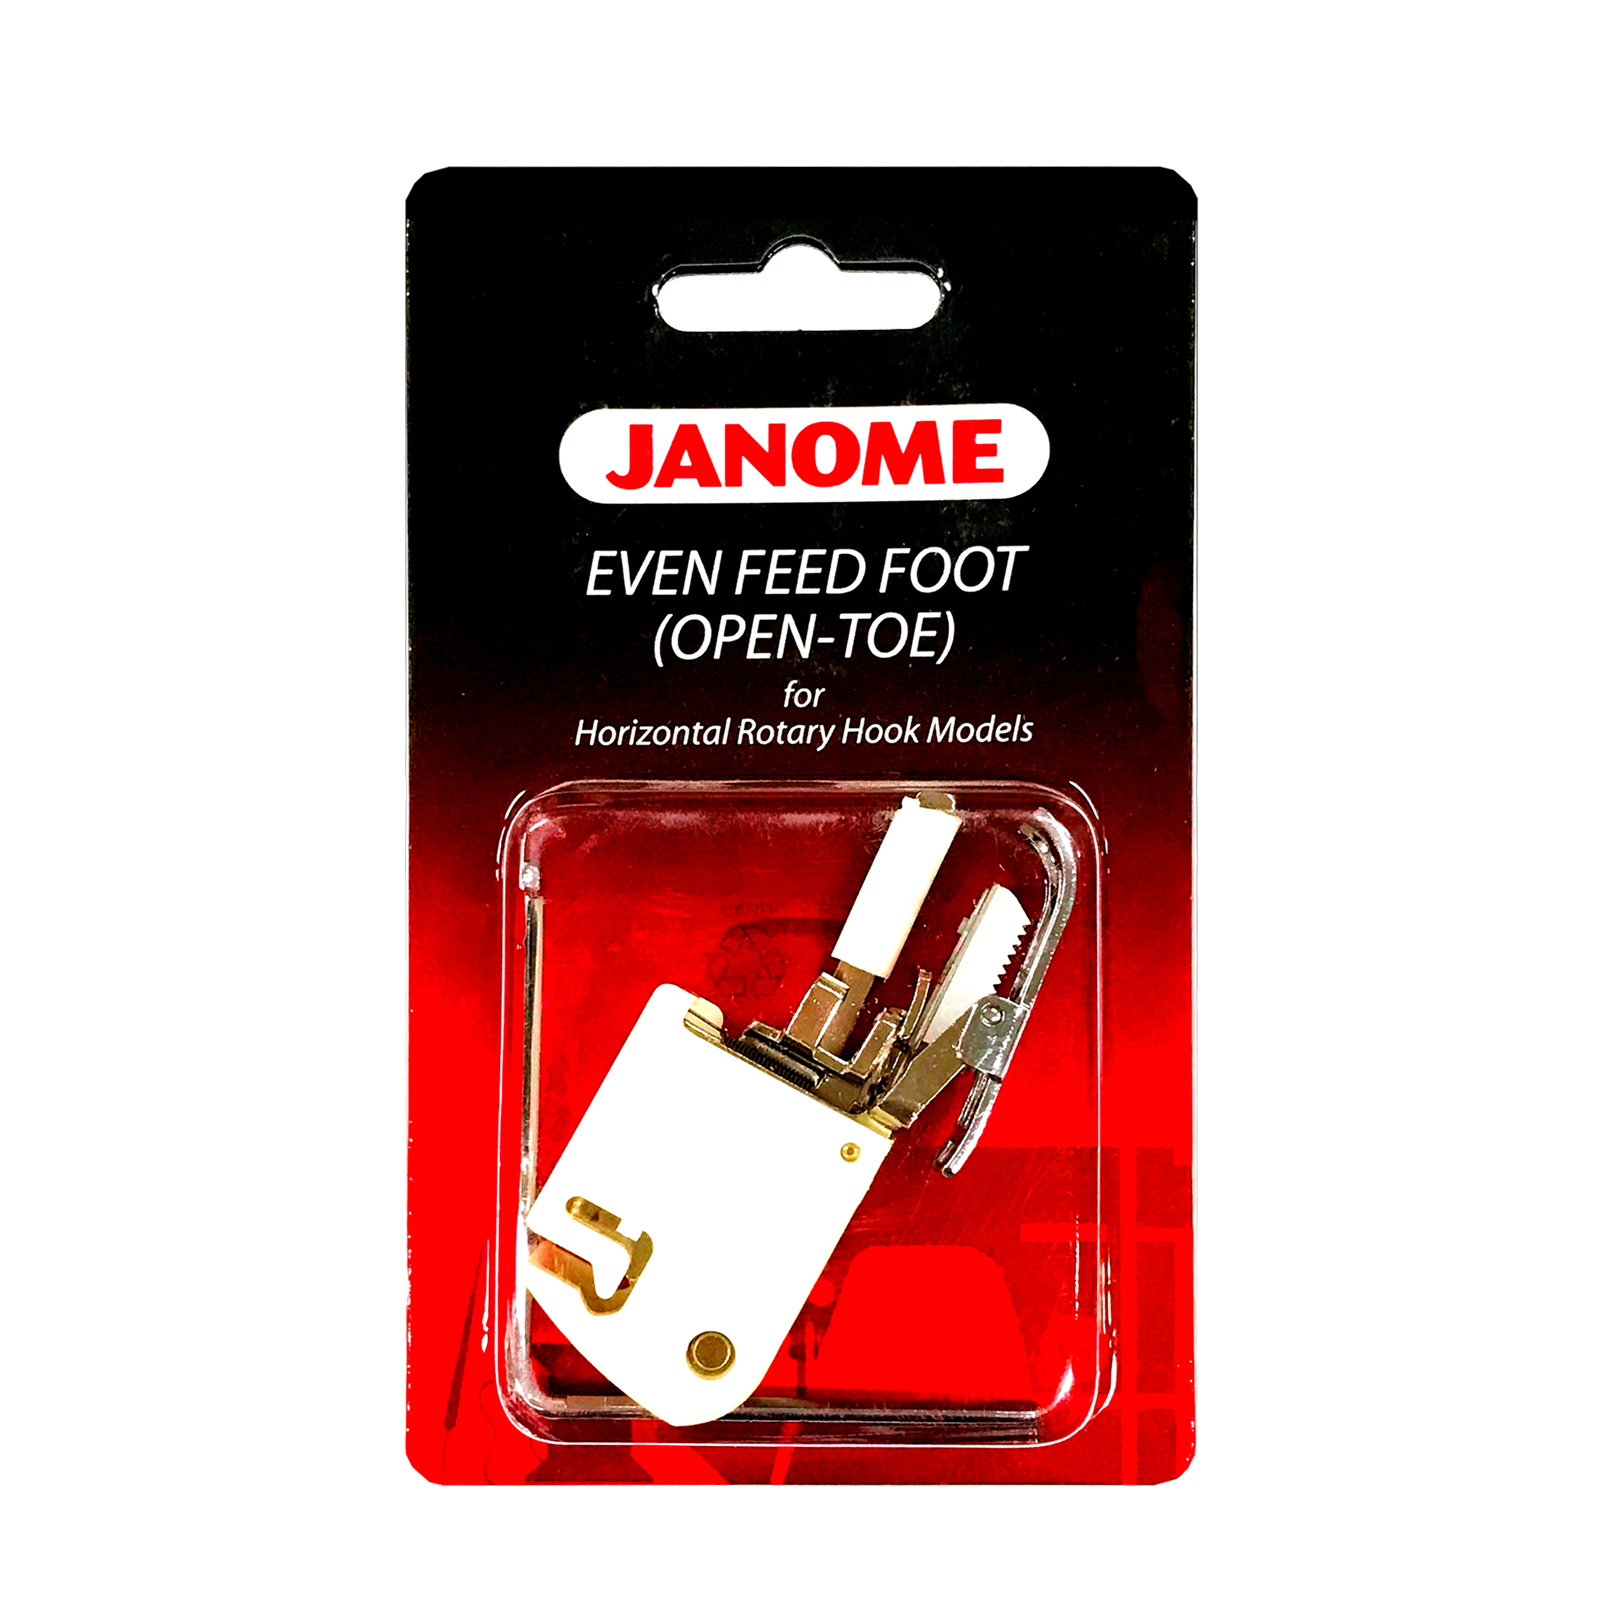 Janome Even Feed Foot with Quilting Guide Oscillating Hook Models for Low-Shank Sewing Machines 